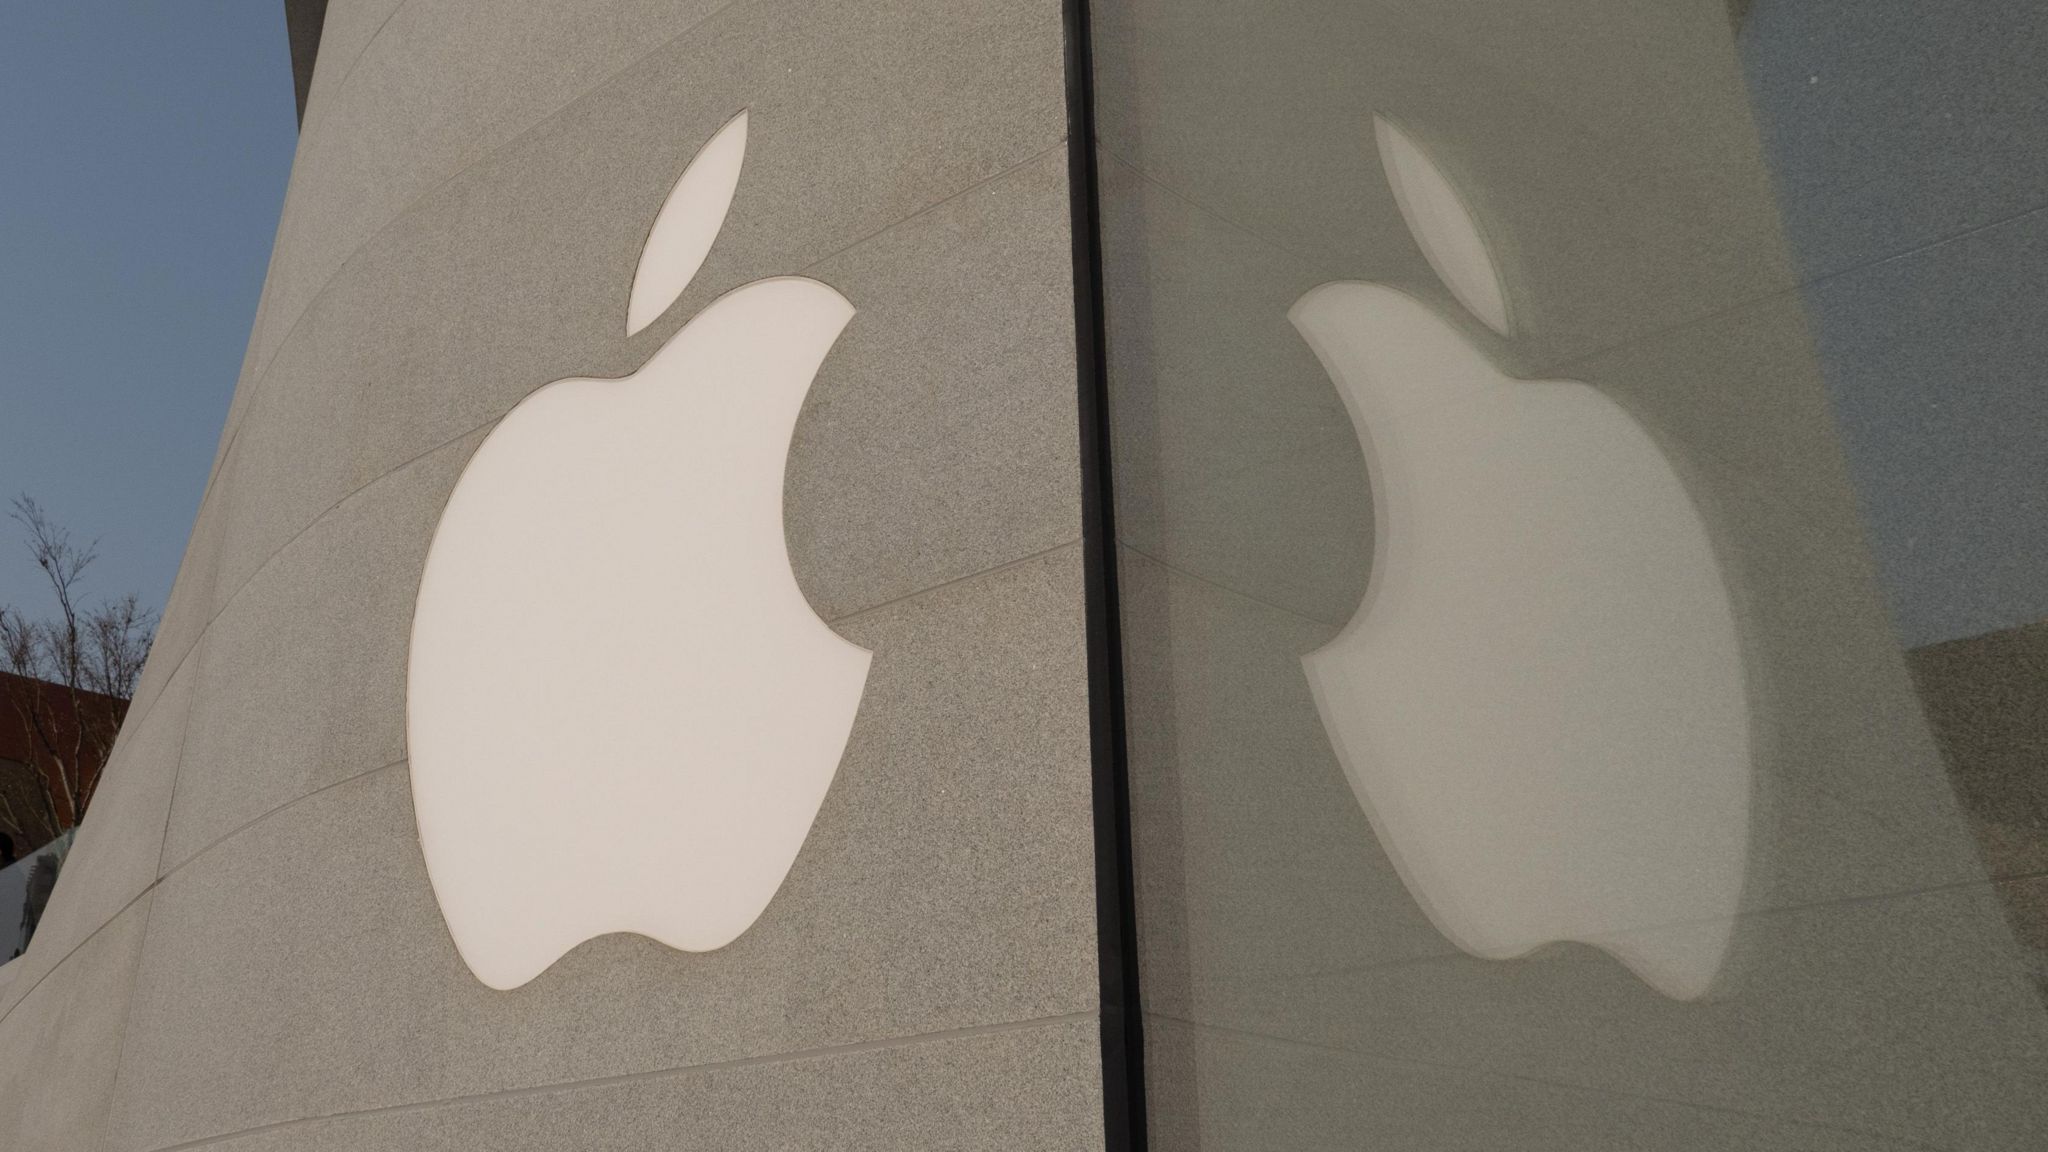 The Apple logo reflected in glass